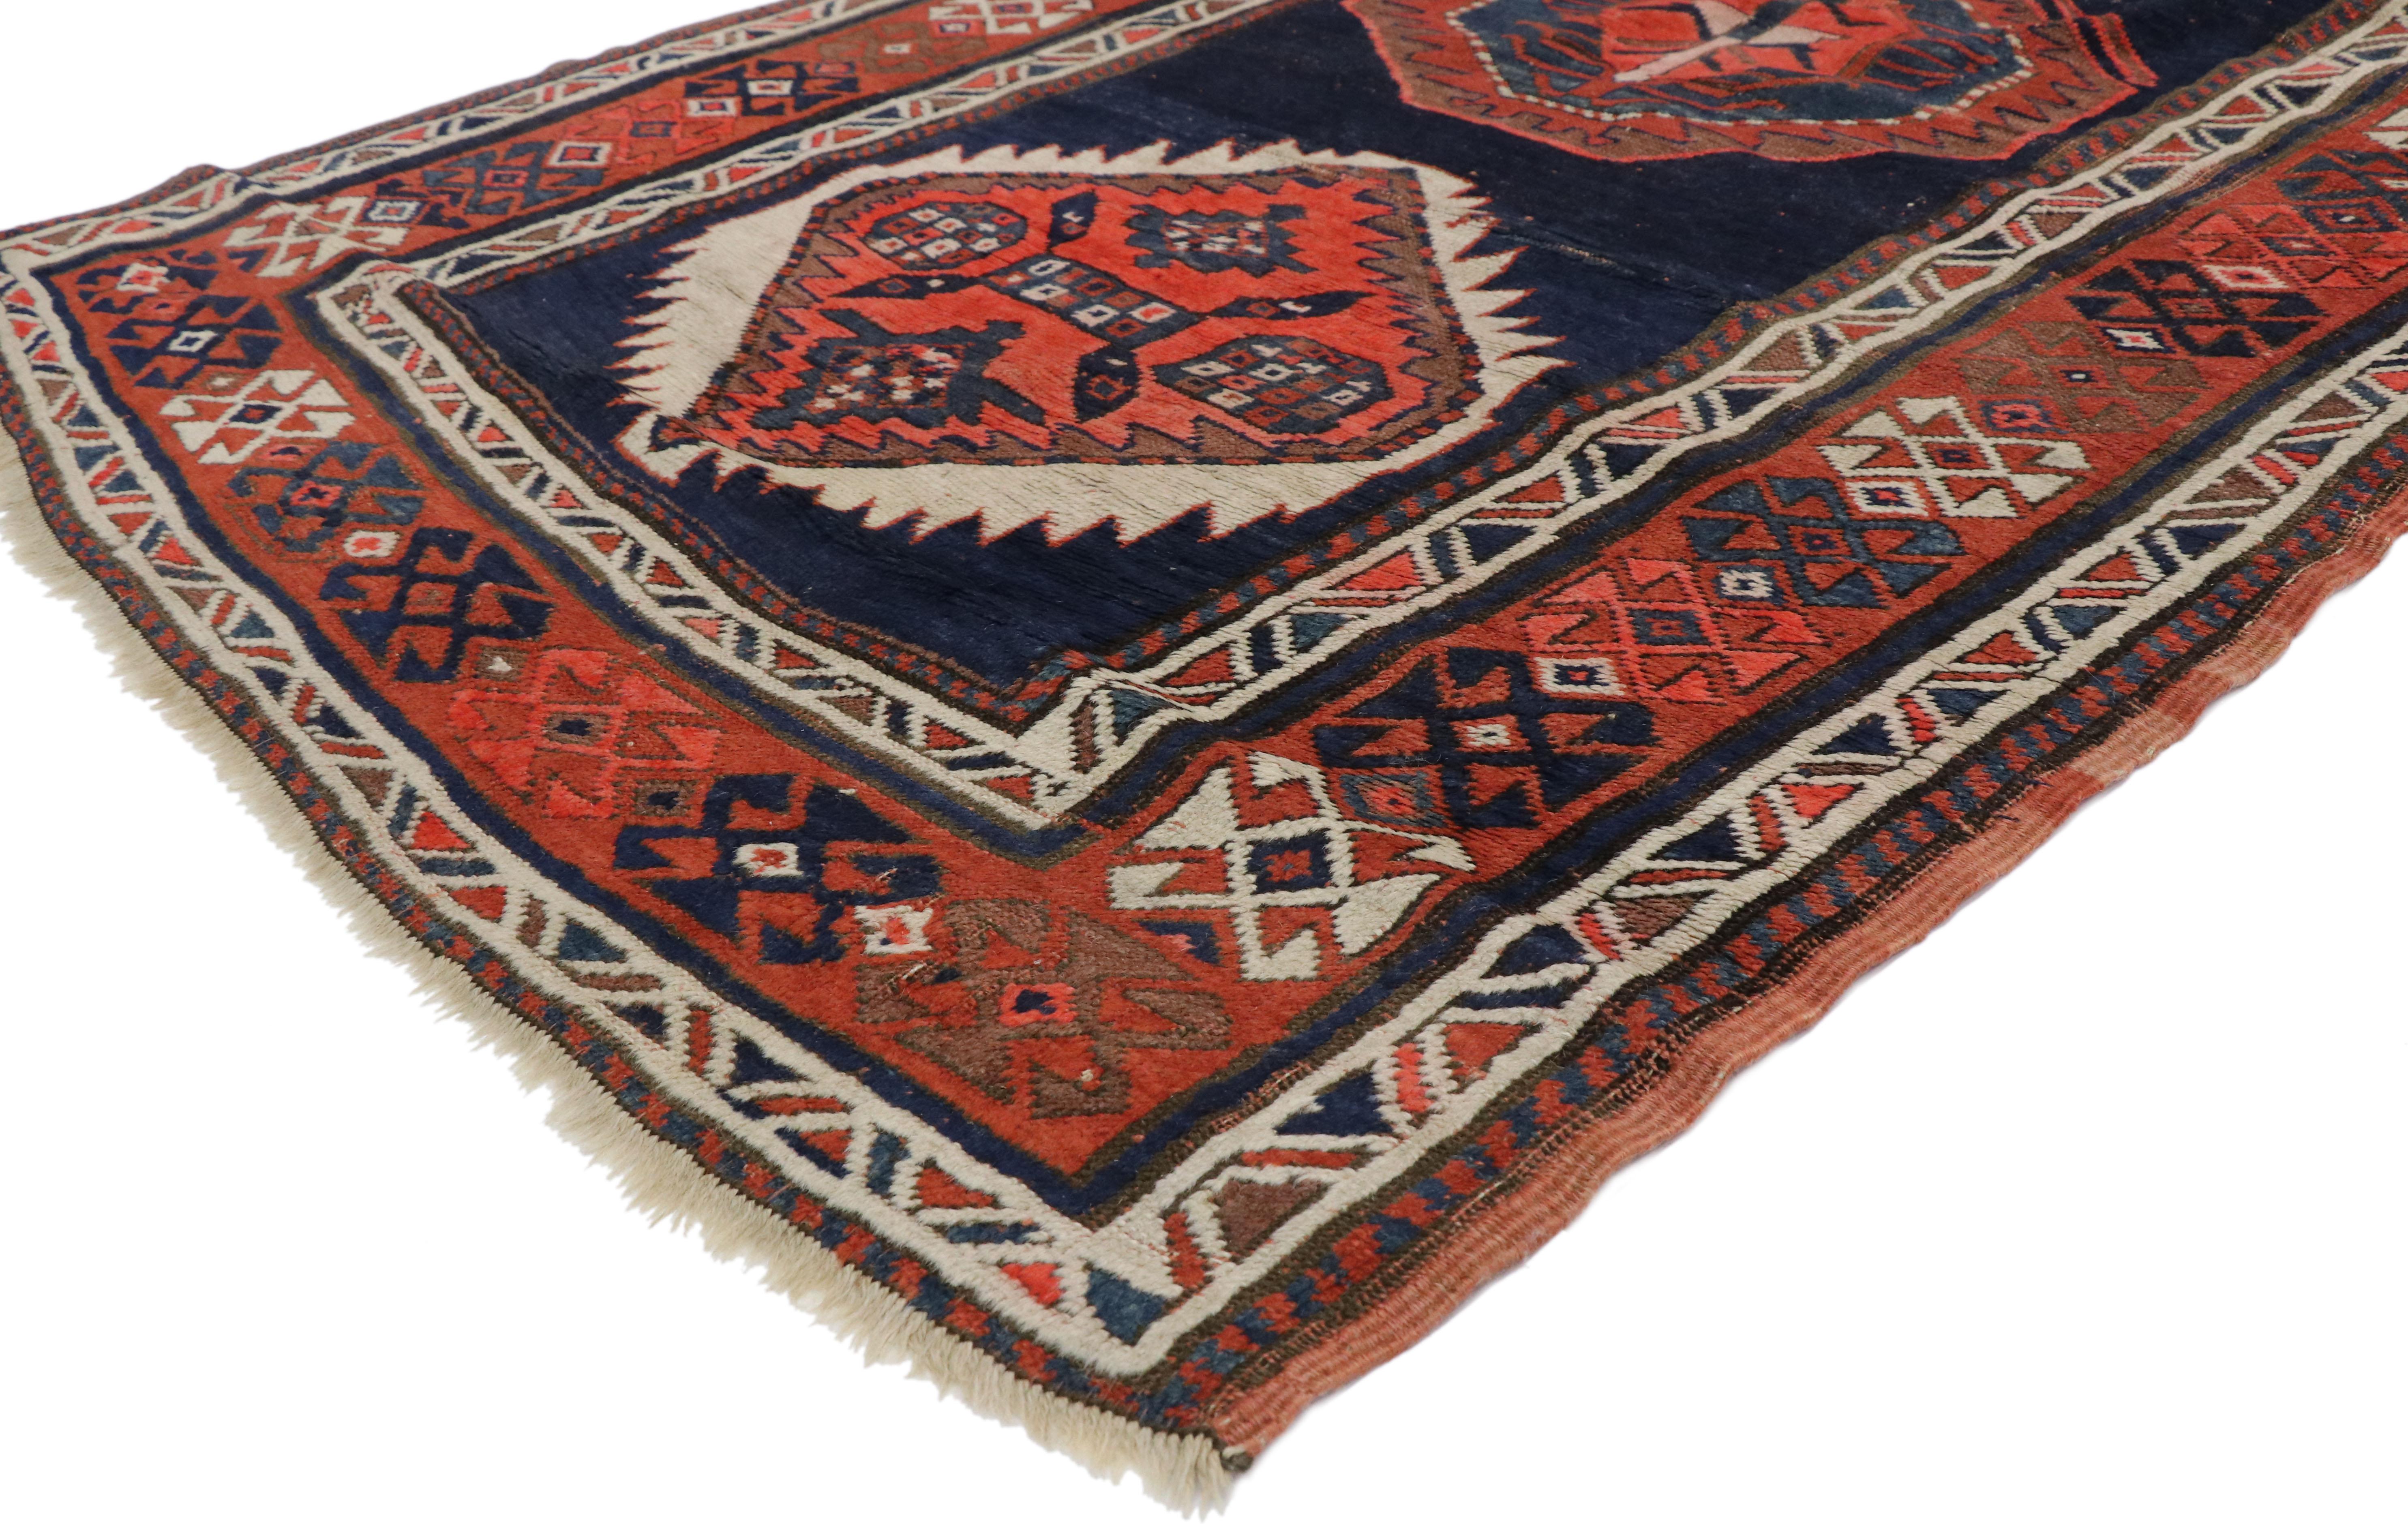 77057, antique Russian Tribal Kazak rug, Caucasian hallway runner. This hand-knotted wool antique Russian Kazak runner features alternating hexagon and octagon medallions each filled with symbolic motifs on an abrashed navy blue field. Four gazelles